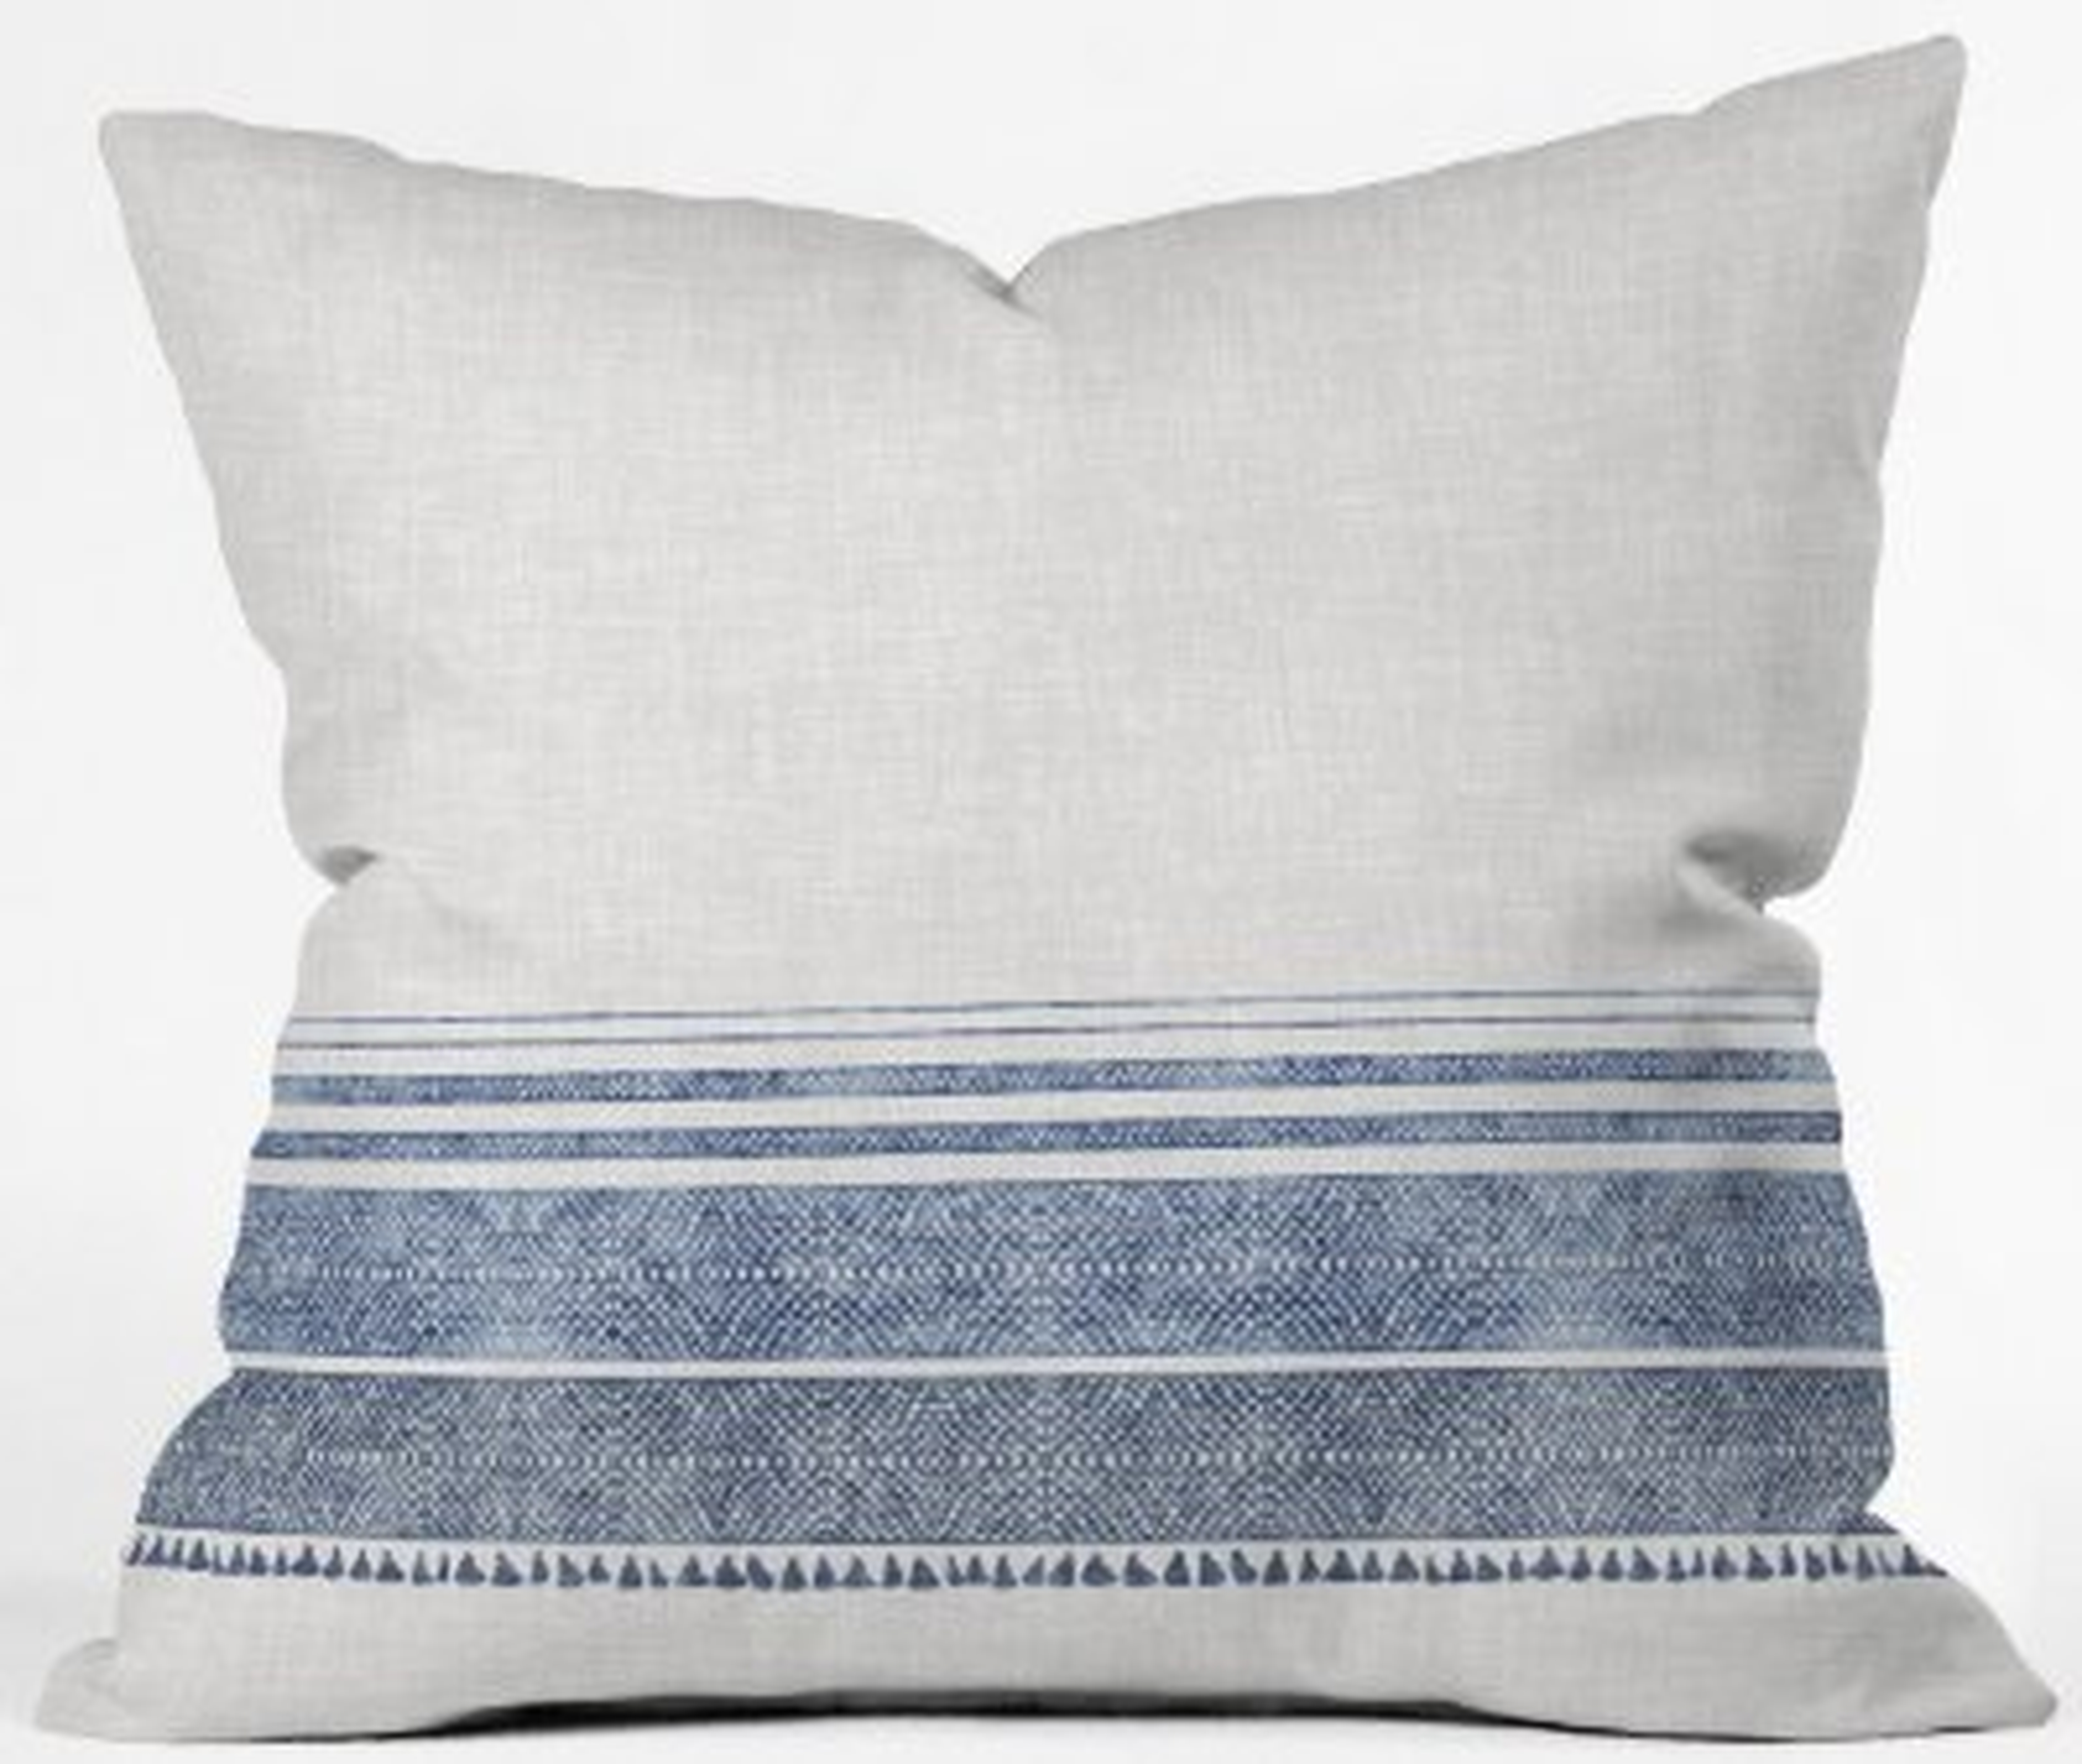 FRENCH LINEN CHAMBRAY TASSEL Throw Pillow with Insert - 16x16 - Wander Print Co.